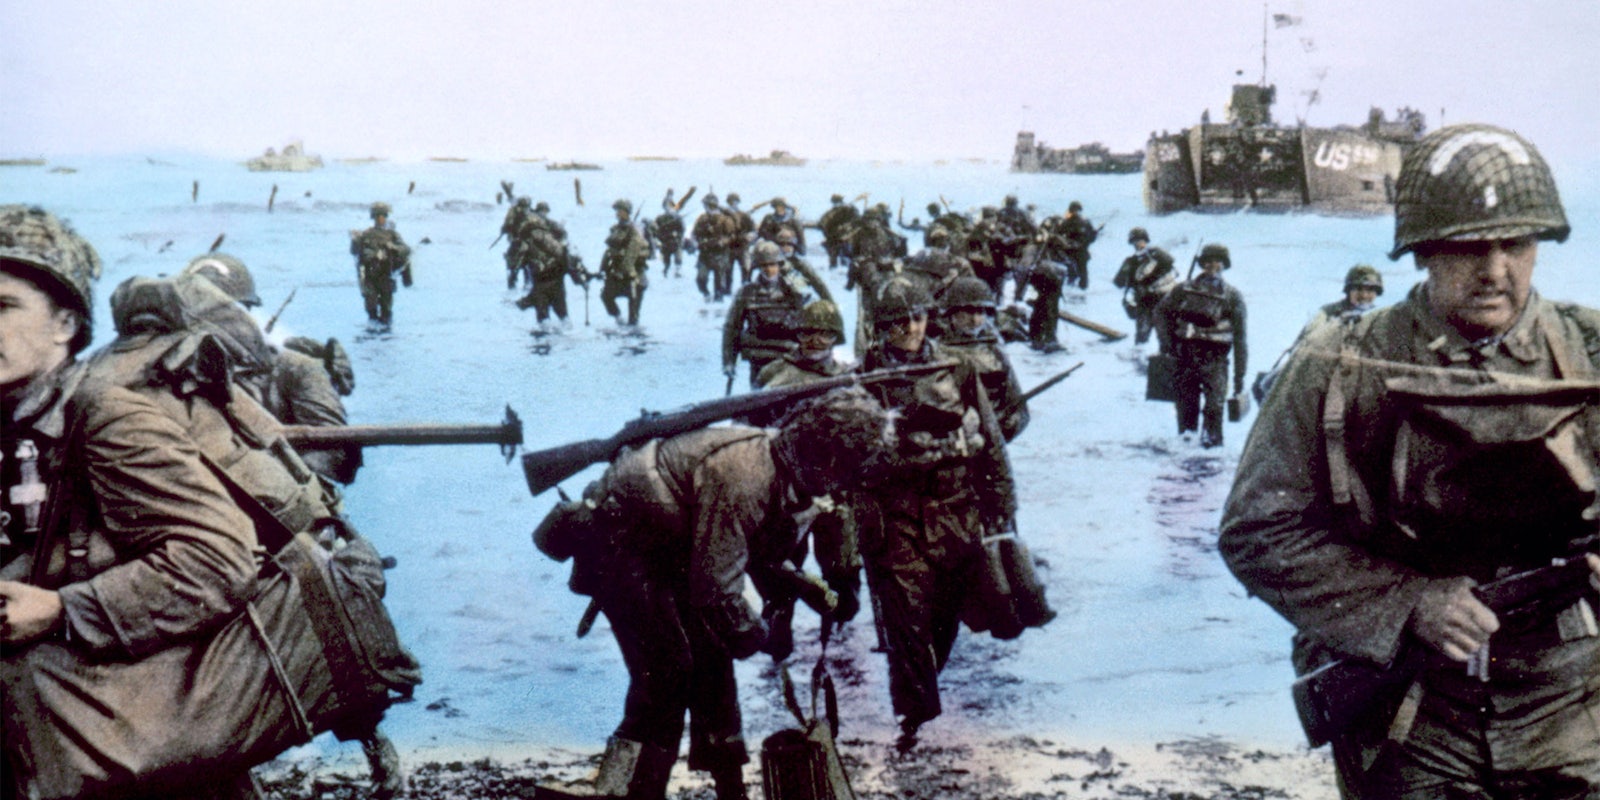 US soldiers enter the beach from the water at The Battle of Normandy, 1944,